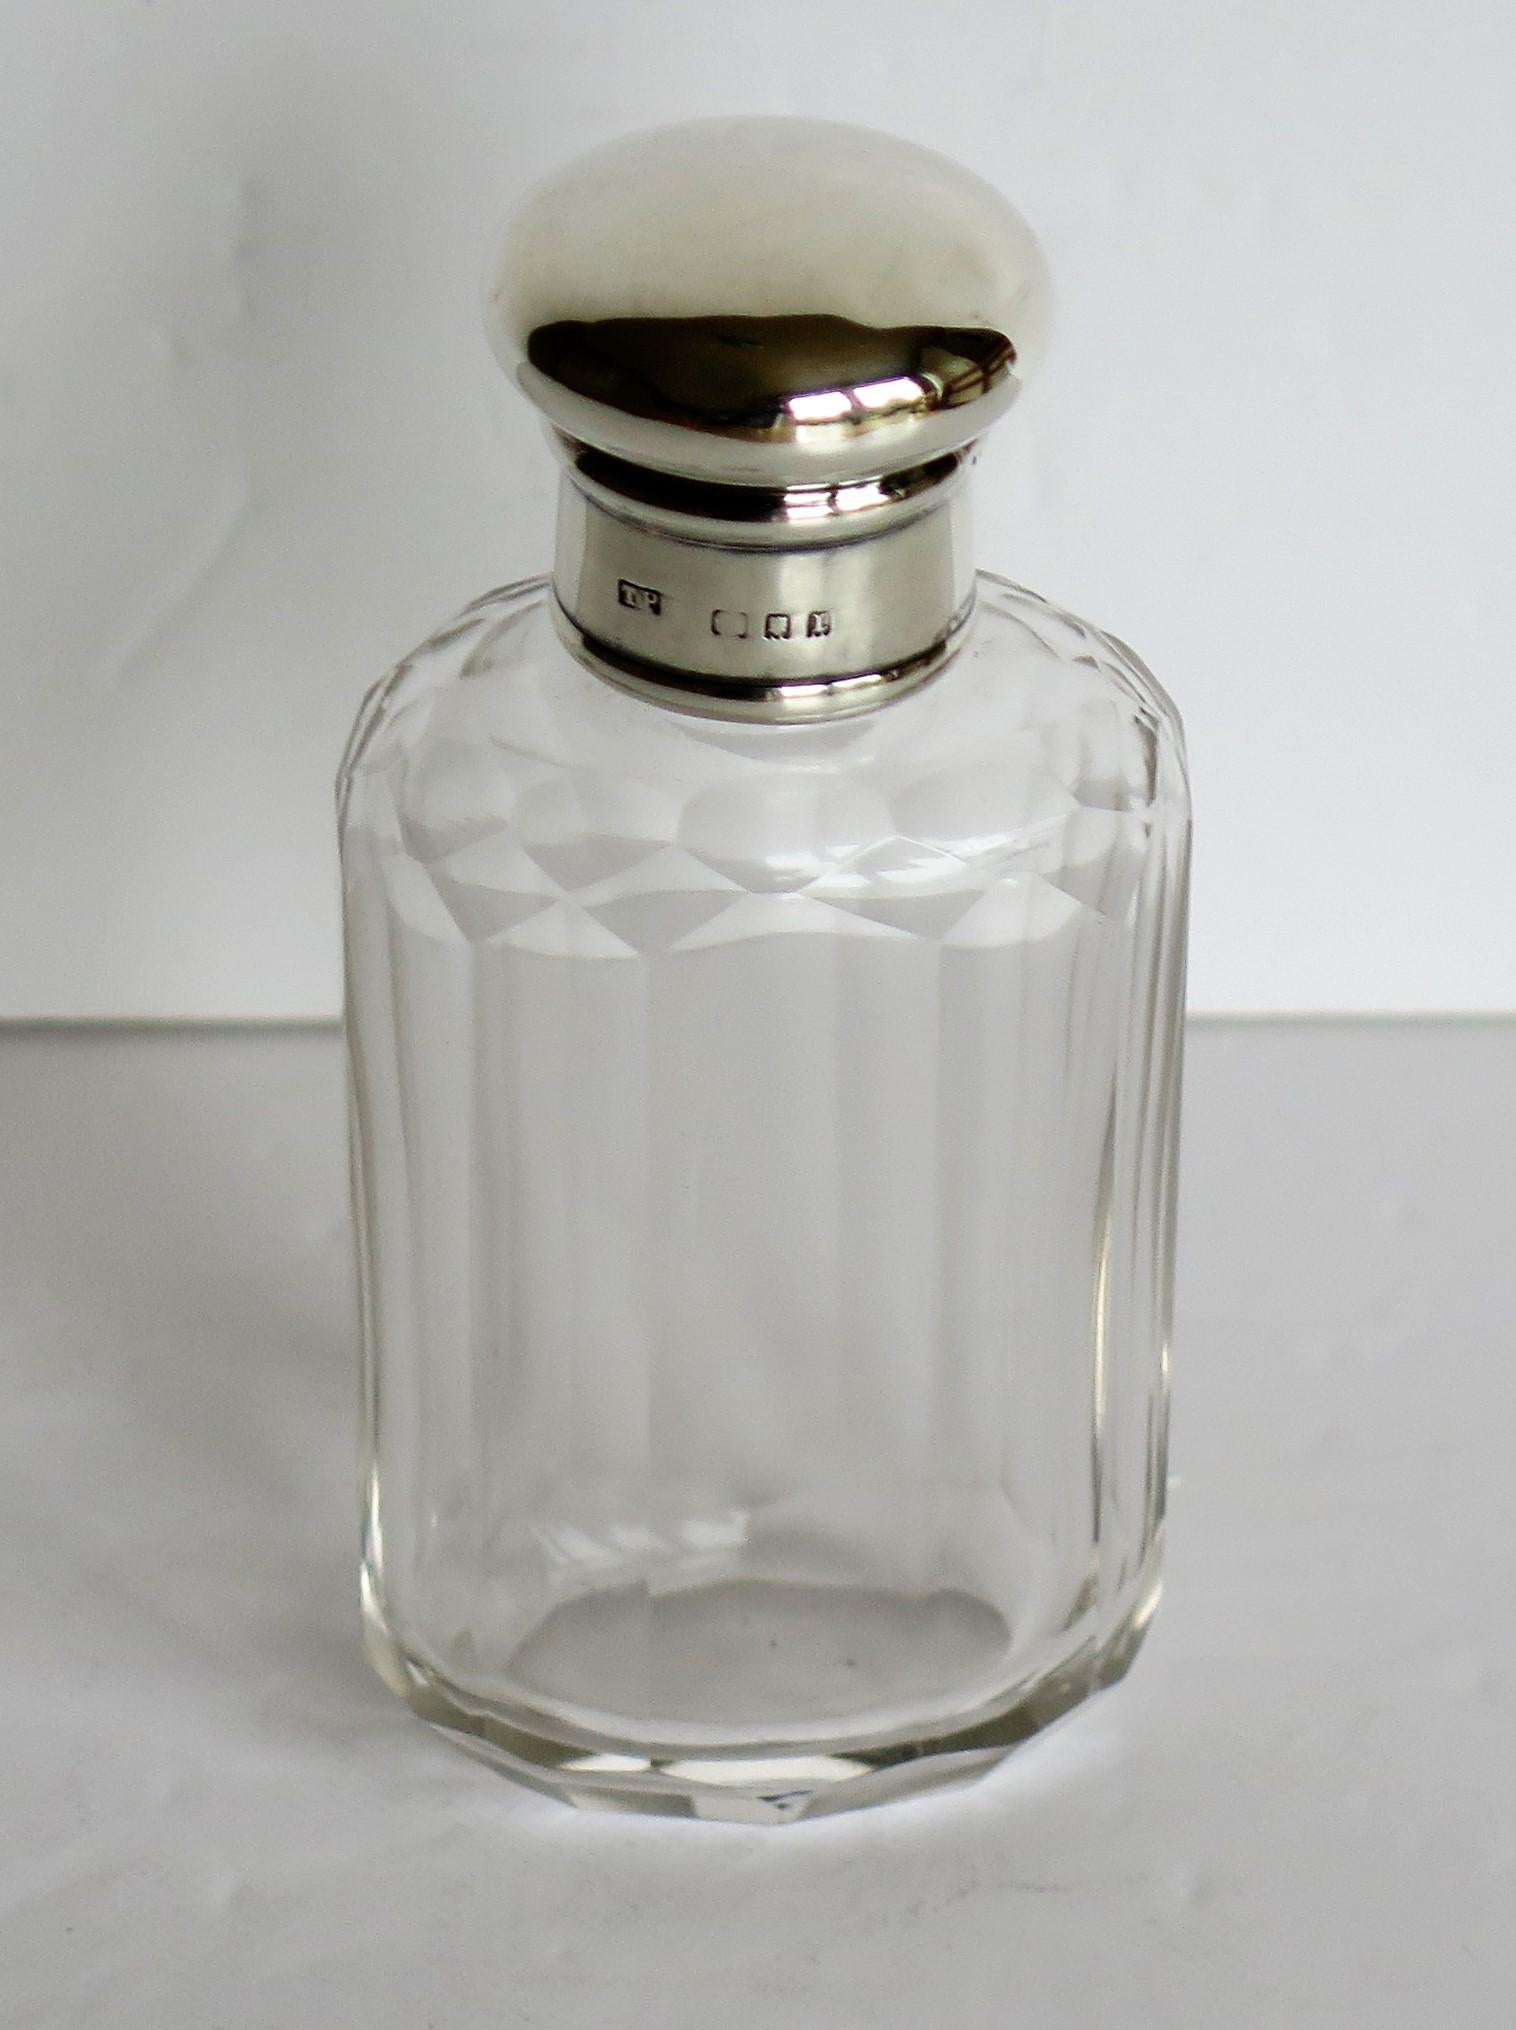 This is a very attractive crystal cut glass cologne or perfume bottle with a sterling silver lid, which we attribute to Thomas Perry of London, in the Art Deco period of 1926

The bottle or jar has an oval - rectilinear shape with vertical fluted